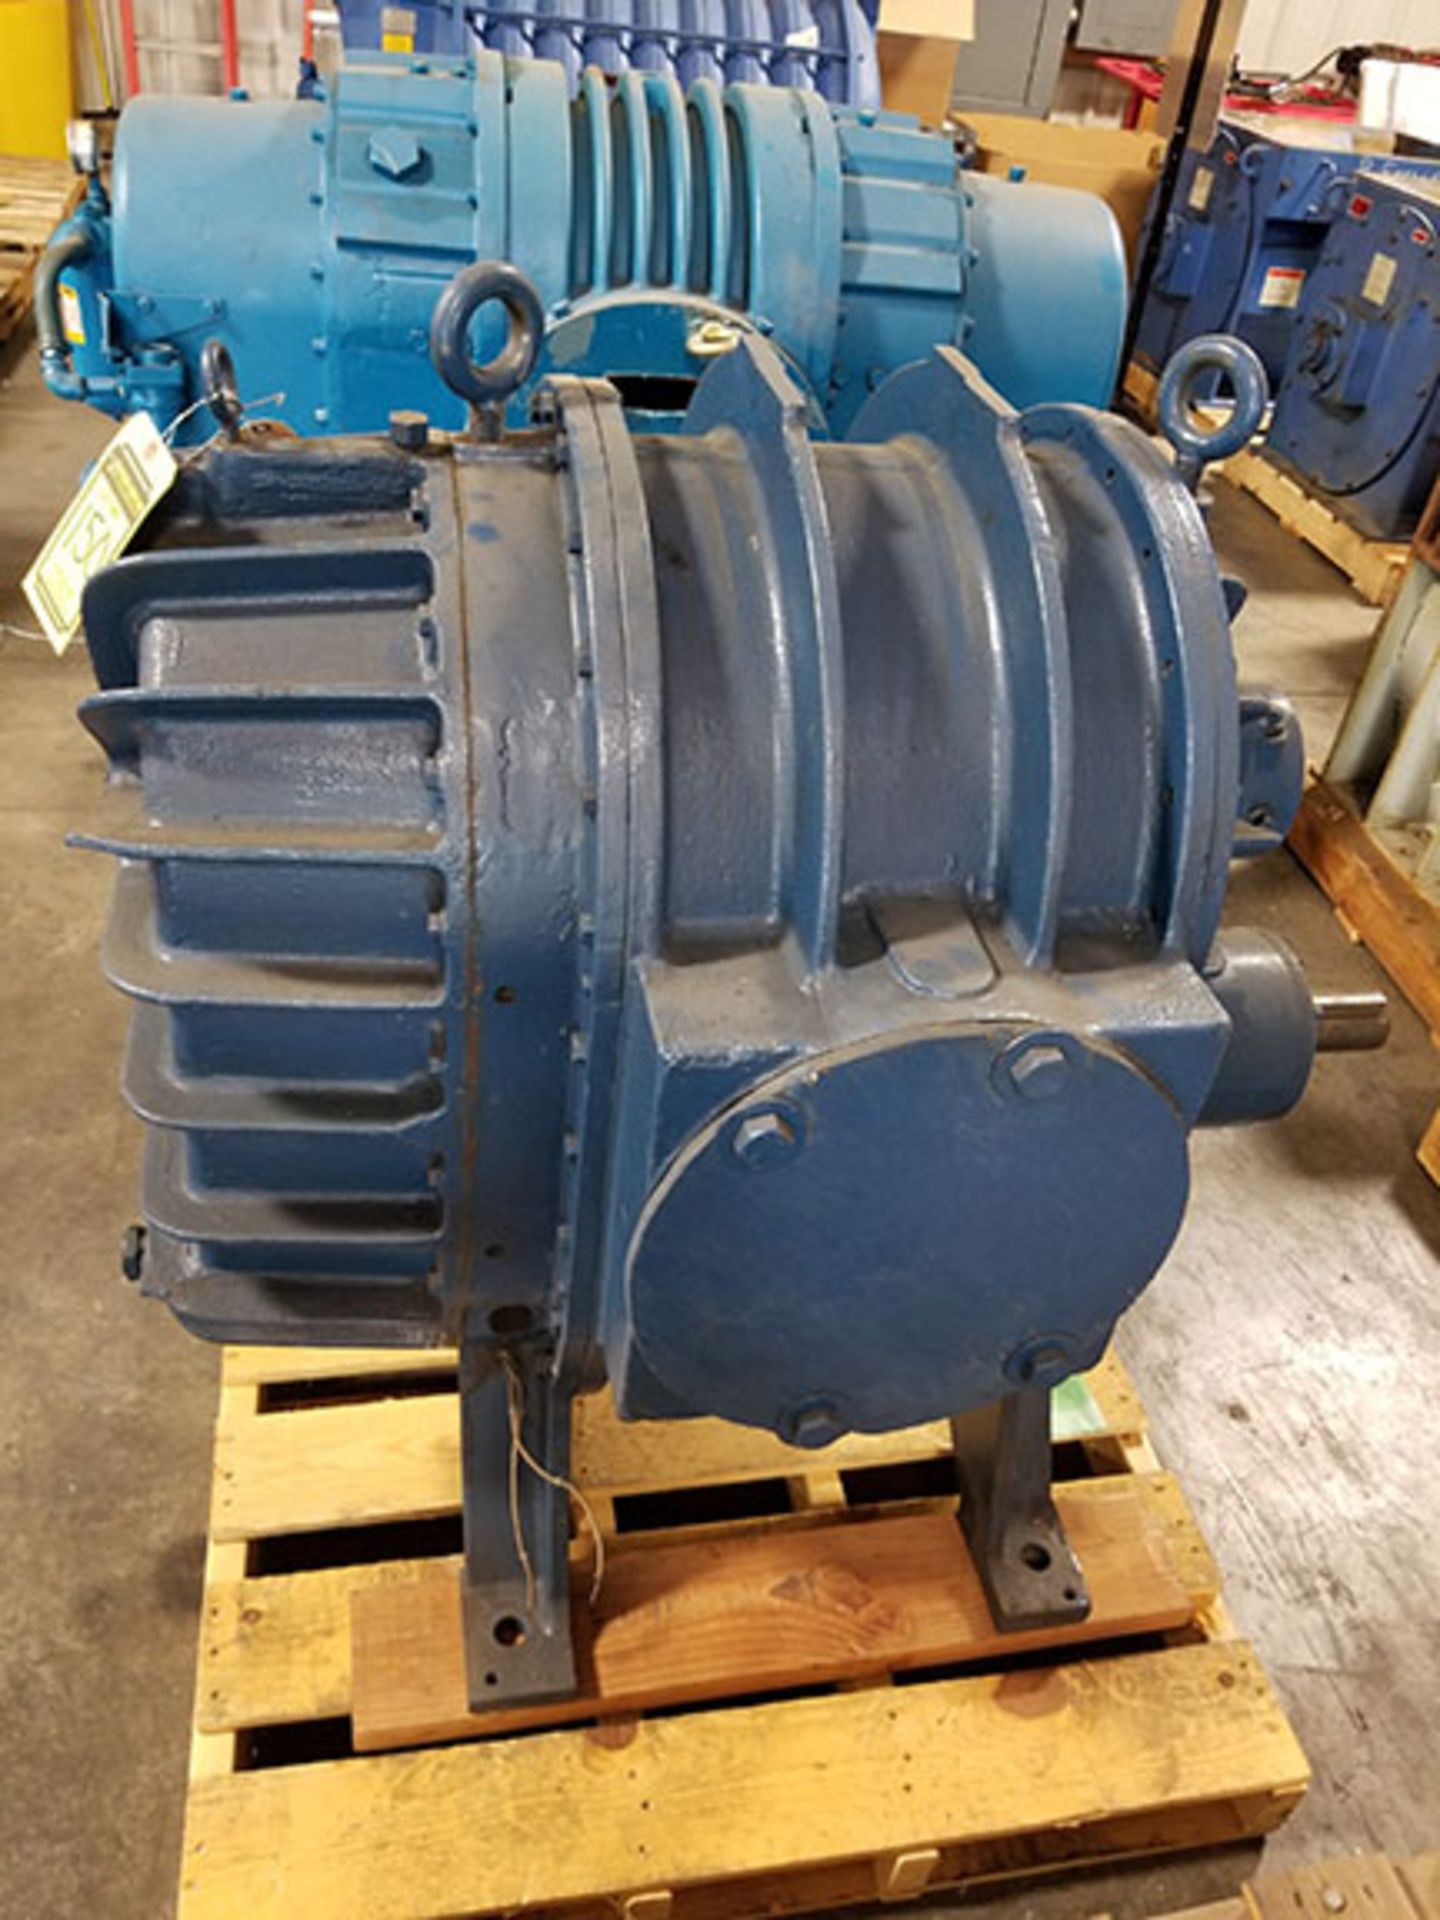 ROTARY LOBE BLOWER, 12" C 16" RAS-V WITH IBB, 35574 INLET VOLUME, 845 RPM, 1998, 68 G. DISCHARGE - Image 6 of 6